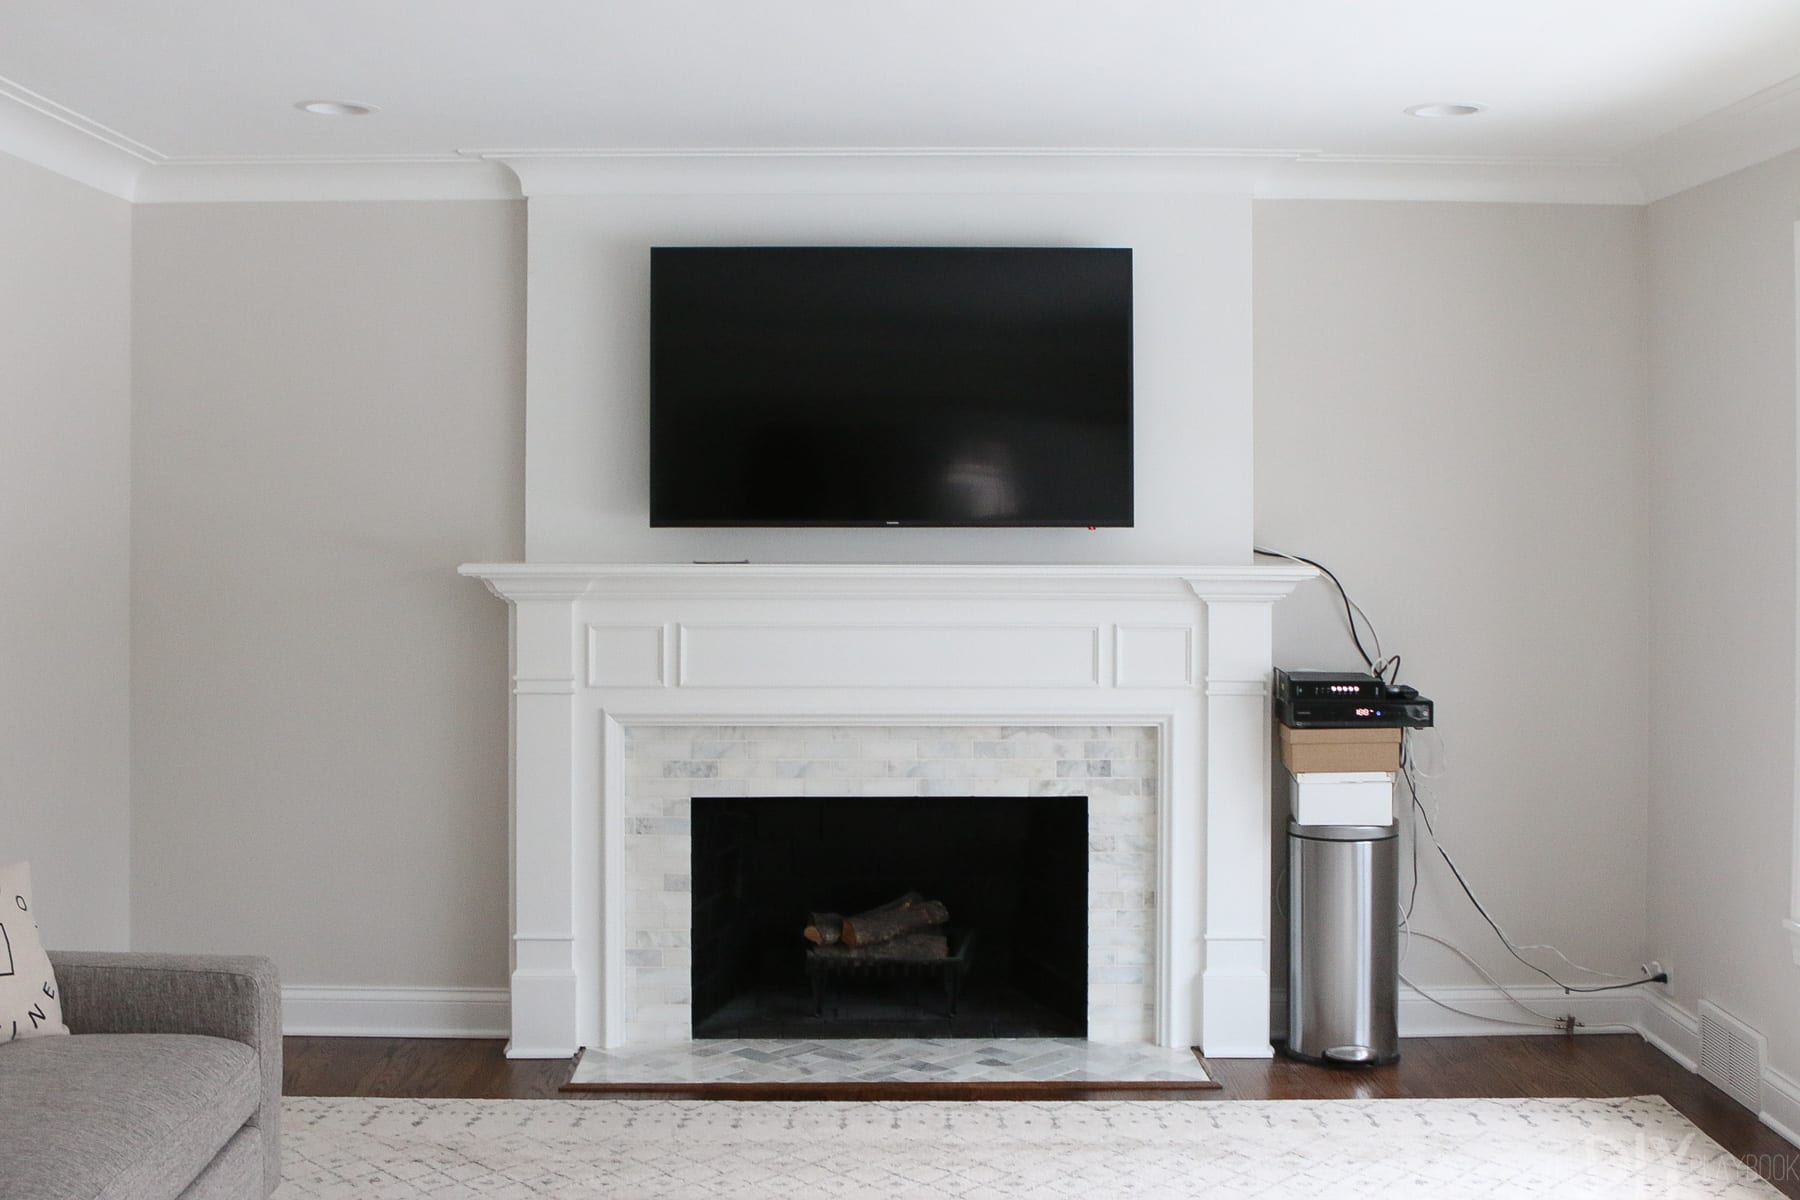 White Built Ins Around The Fireplace Before And After The intended for proportions 1800 X 1200